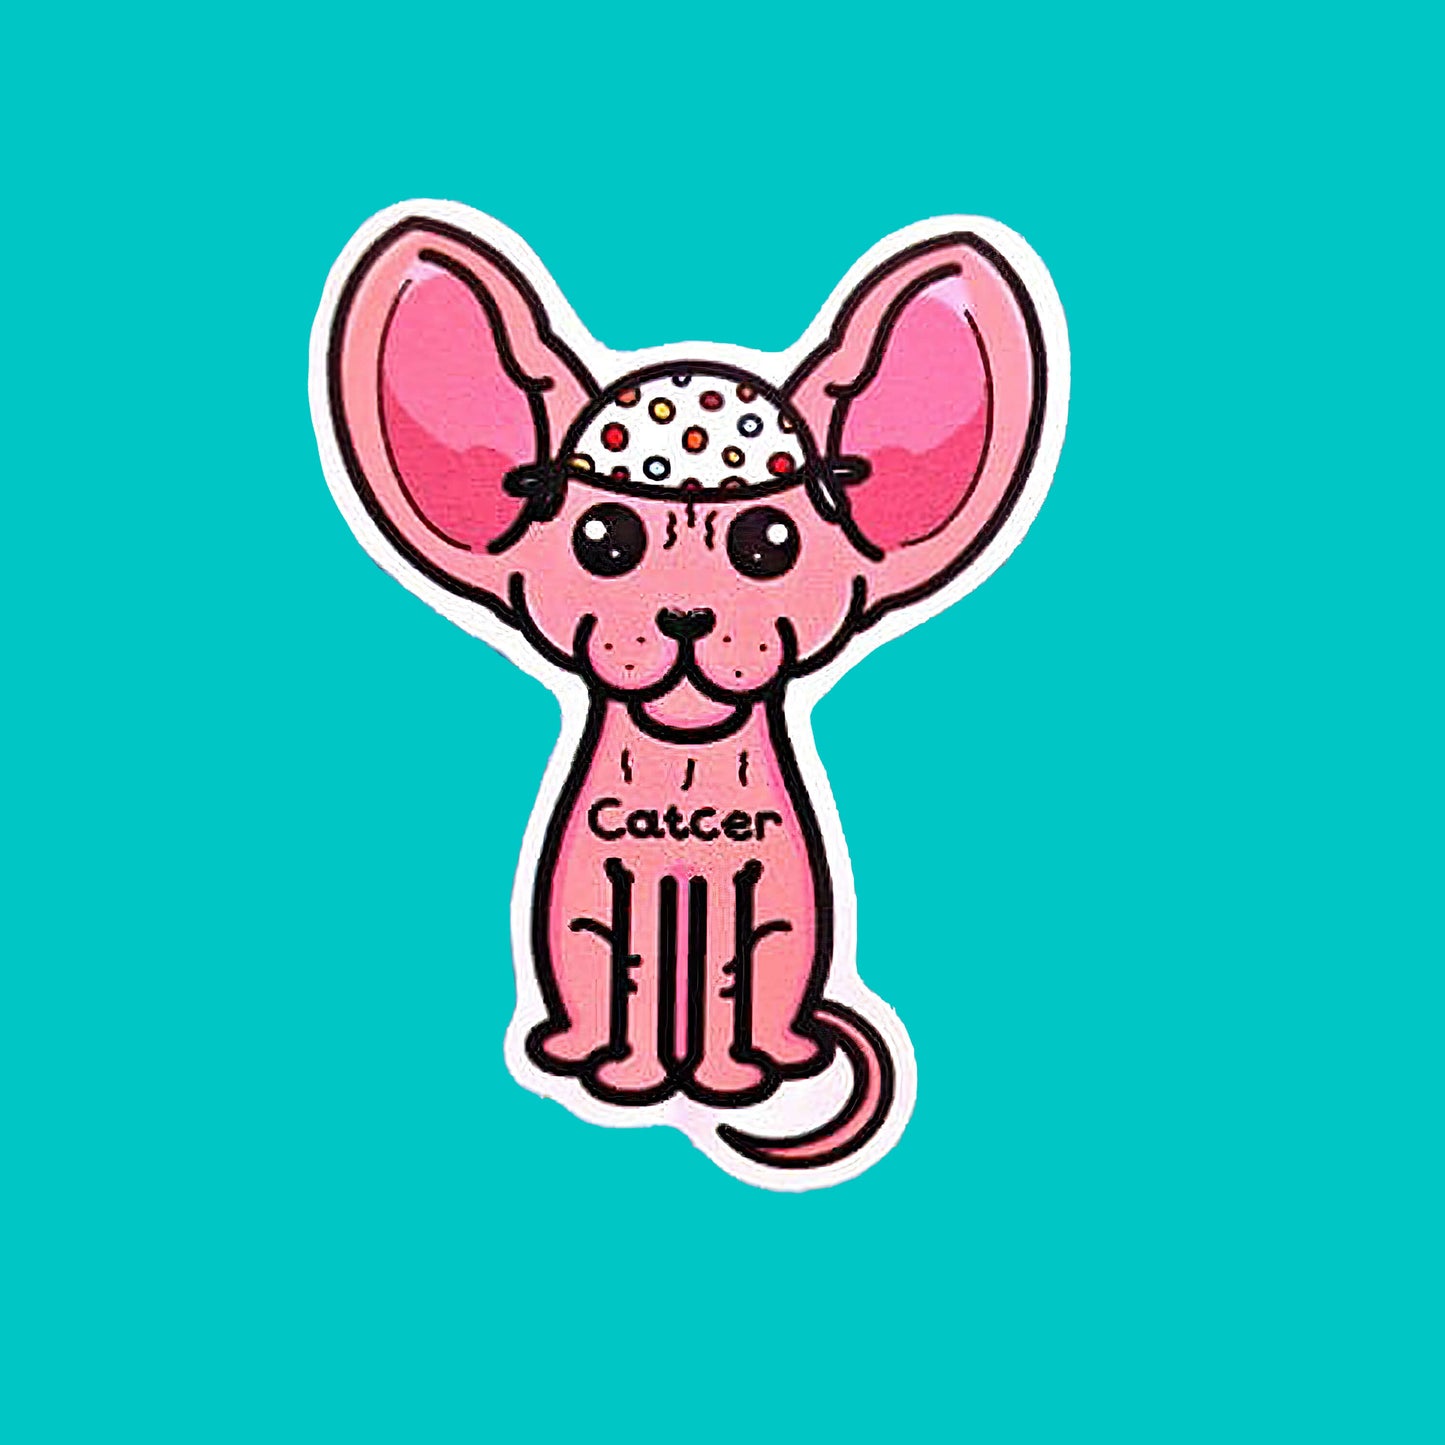 The Catcer Cat Sticker - Cancer on a blue background. The sticker is a pink hairless sphynx cat wearing a white medical cap with rainbow polka dots, across its chest reads 'Catcer'. Designed to raise awareness for cancer.